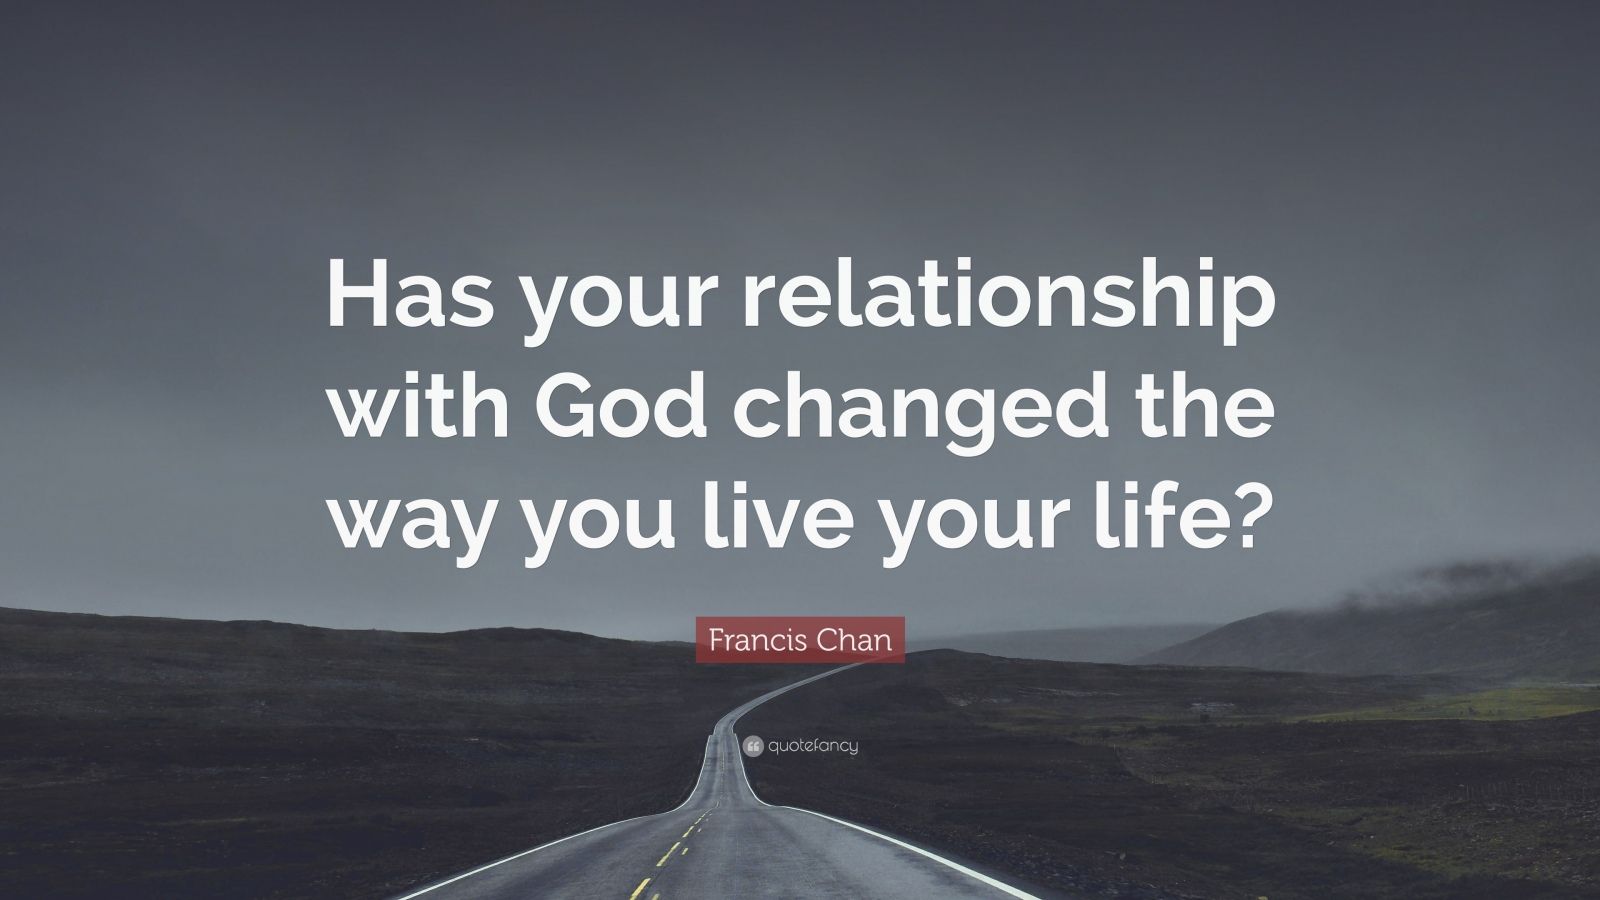 Francis Chan Quote “Has your relationship with God